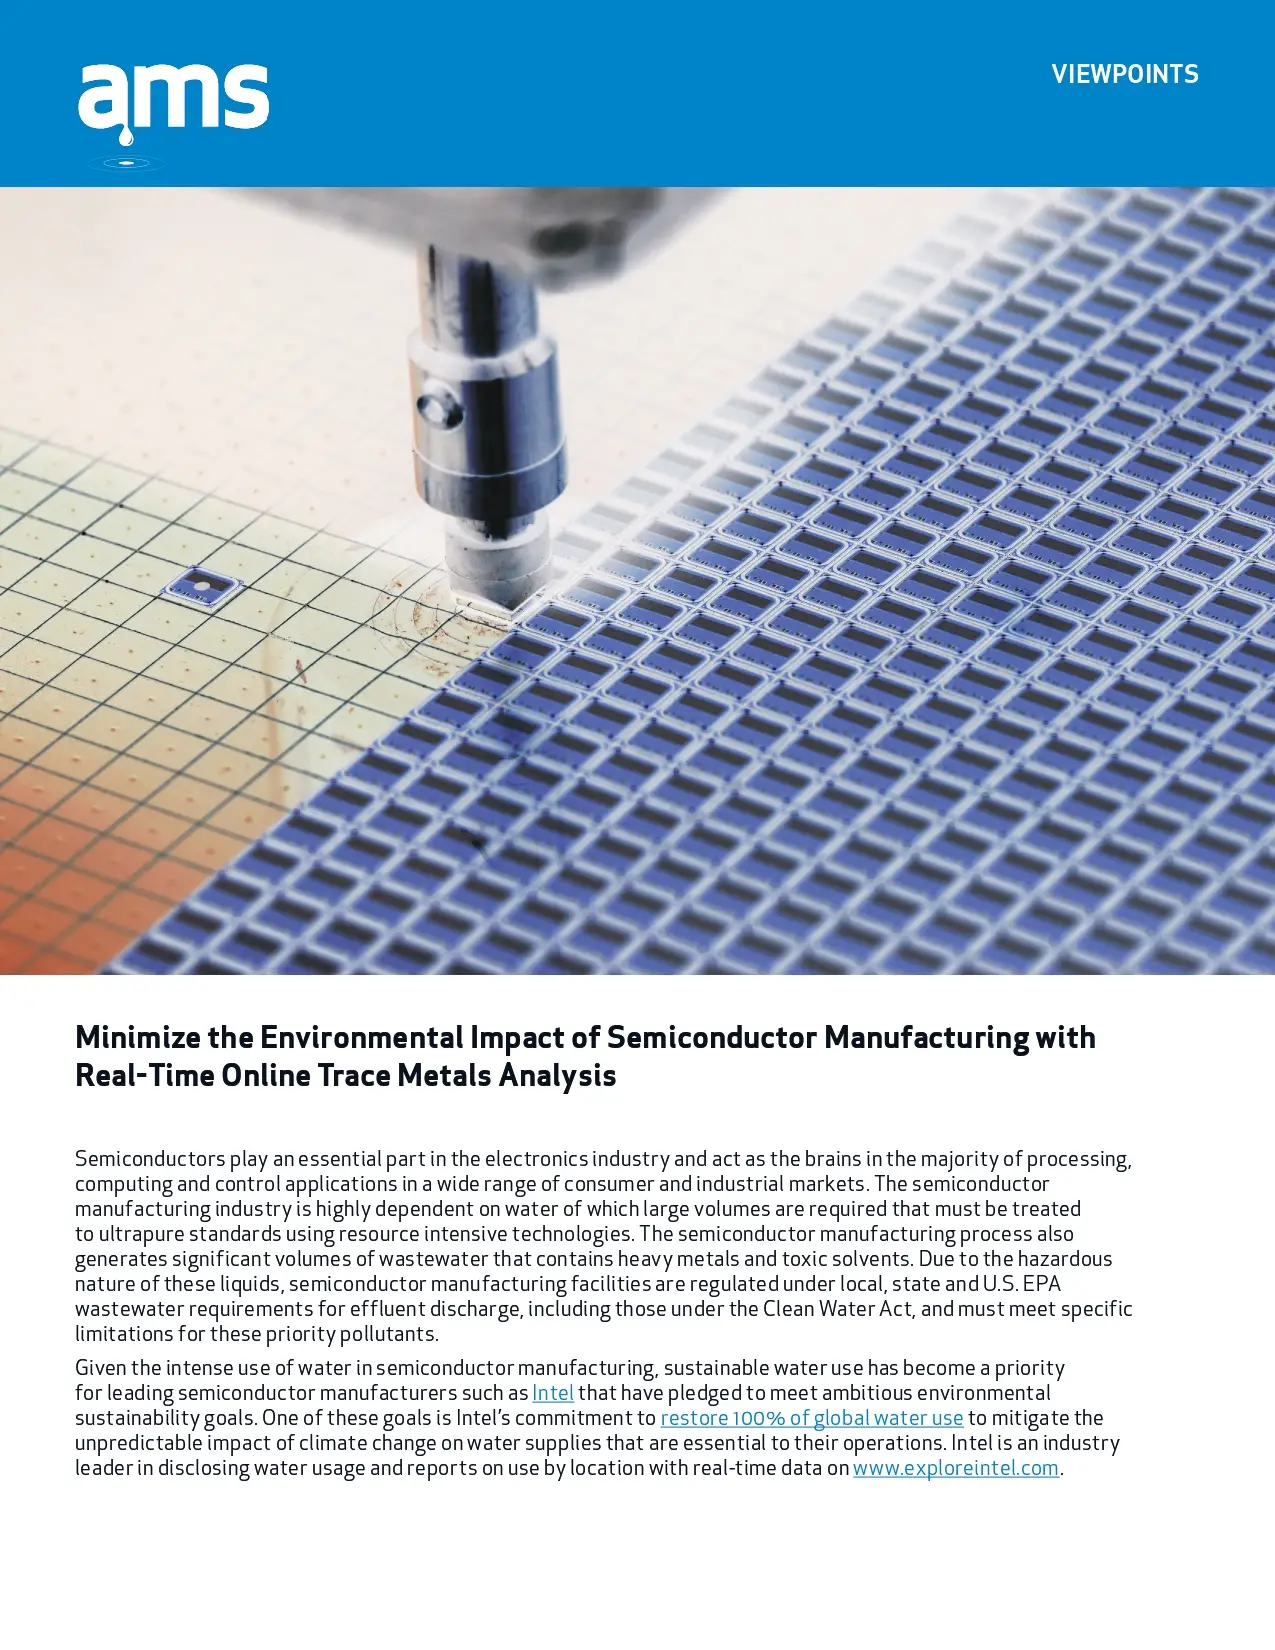 Minimize The Environmental Impact Of Semiconductor Manufacturing With Real-Time Online Trace Metals Analysis